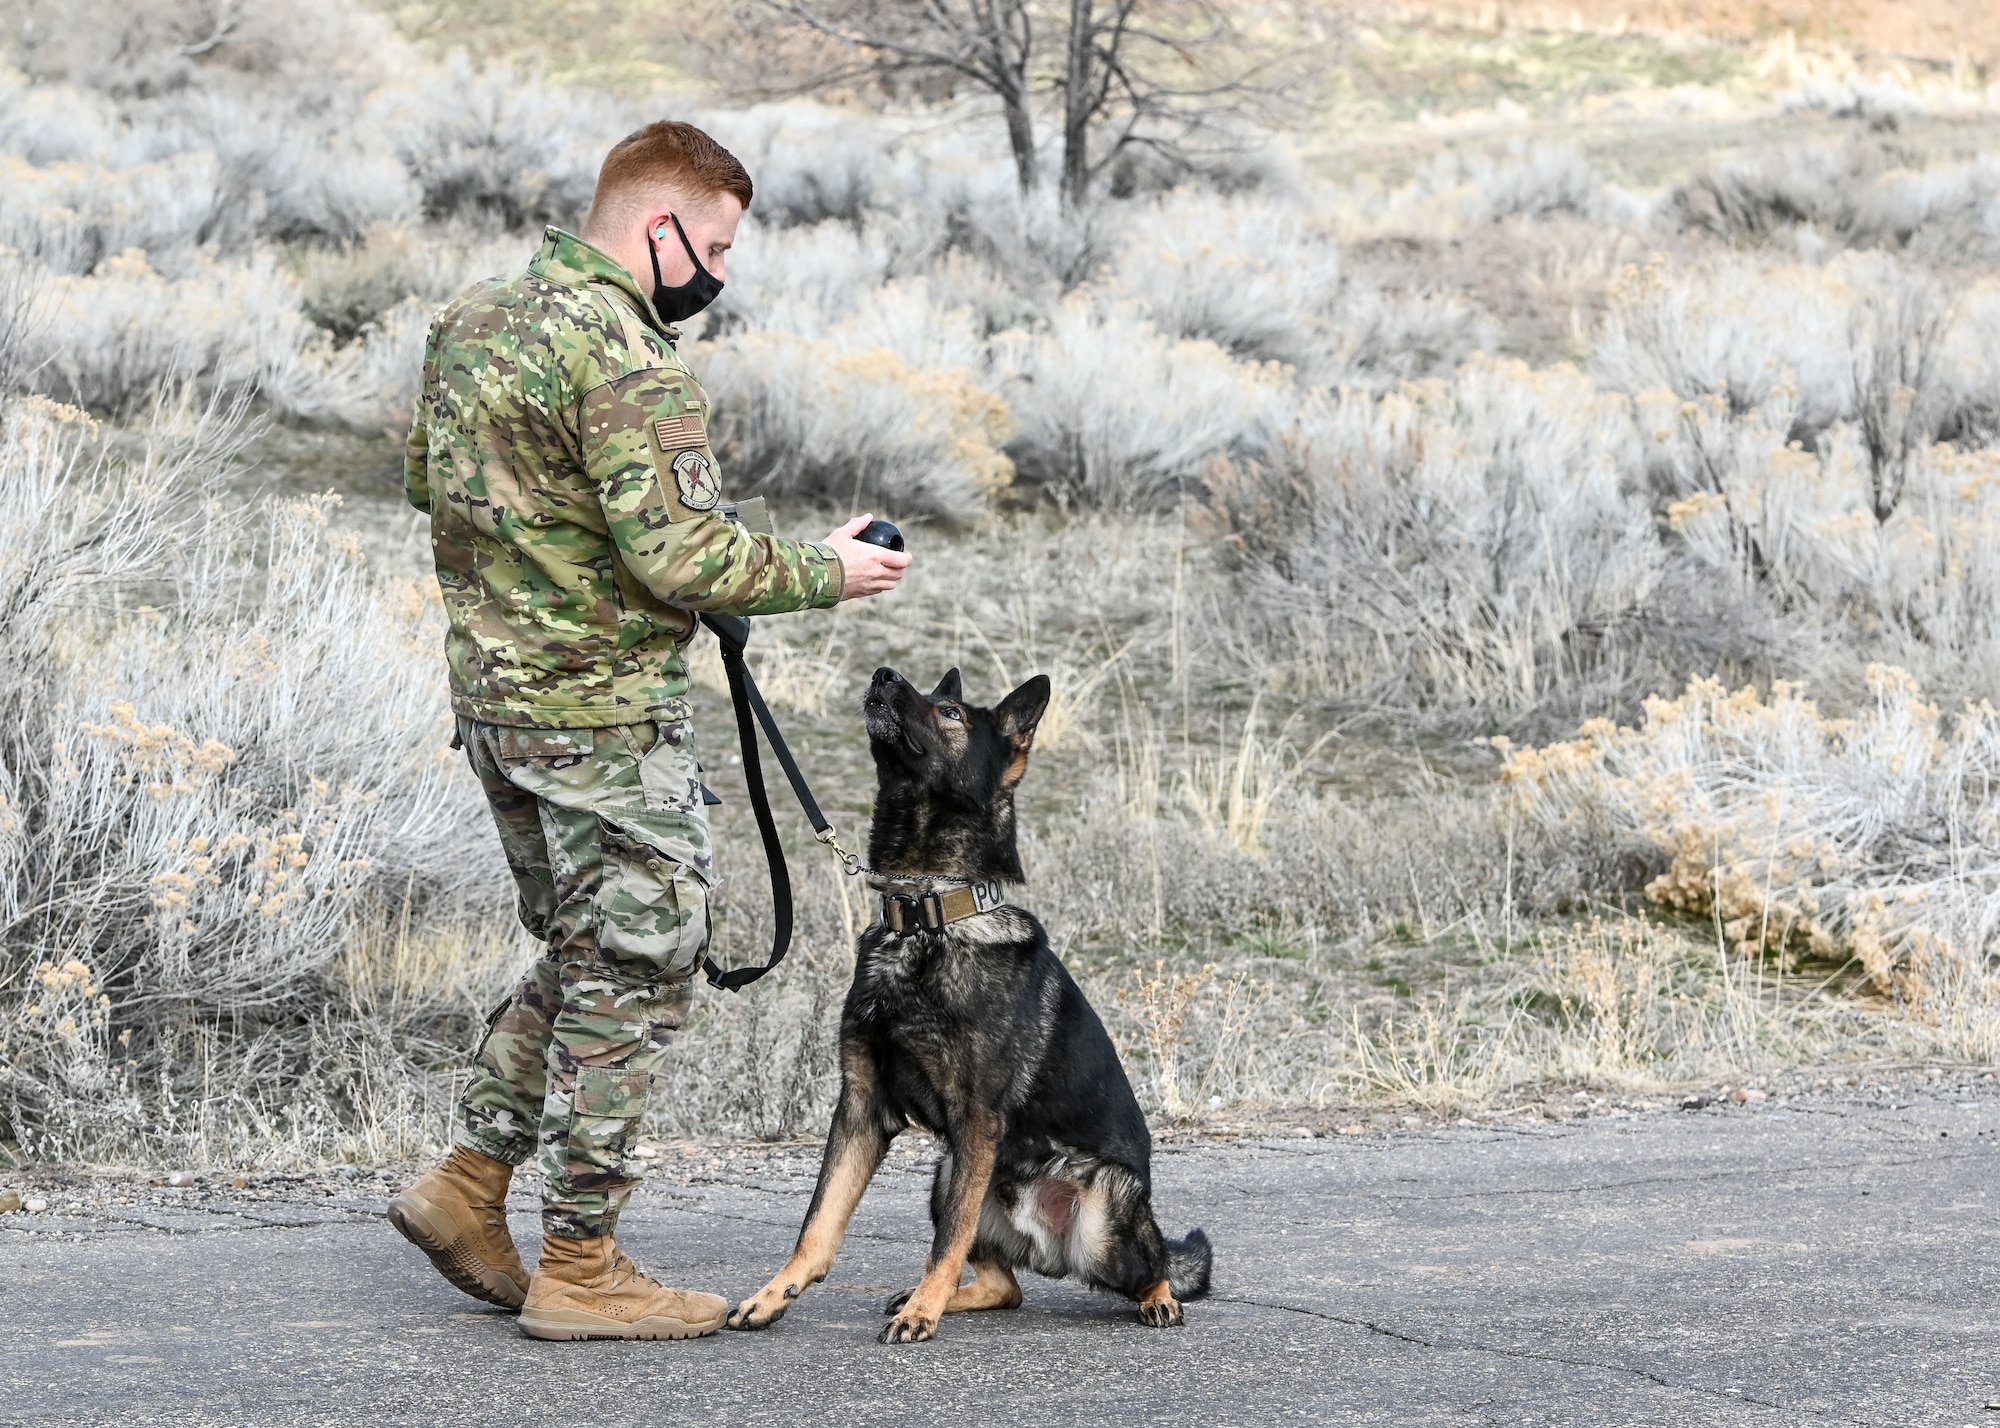 Staff Sgt. Patrick Cushing, a military working dog handler with the 75th Security Forces Squadron, rewards MWD Jimo during explosive device detection training March 10, 2021, at Hill Air Force Base, Utah. (U.S. Air Force photo by Cynthia Griggs)